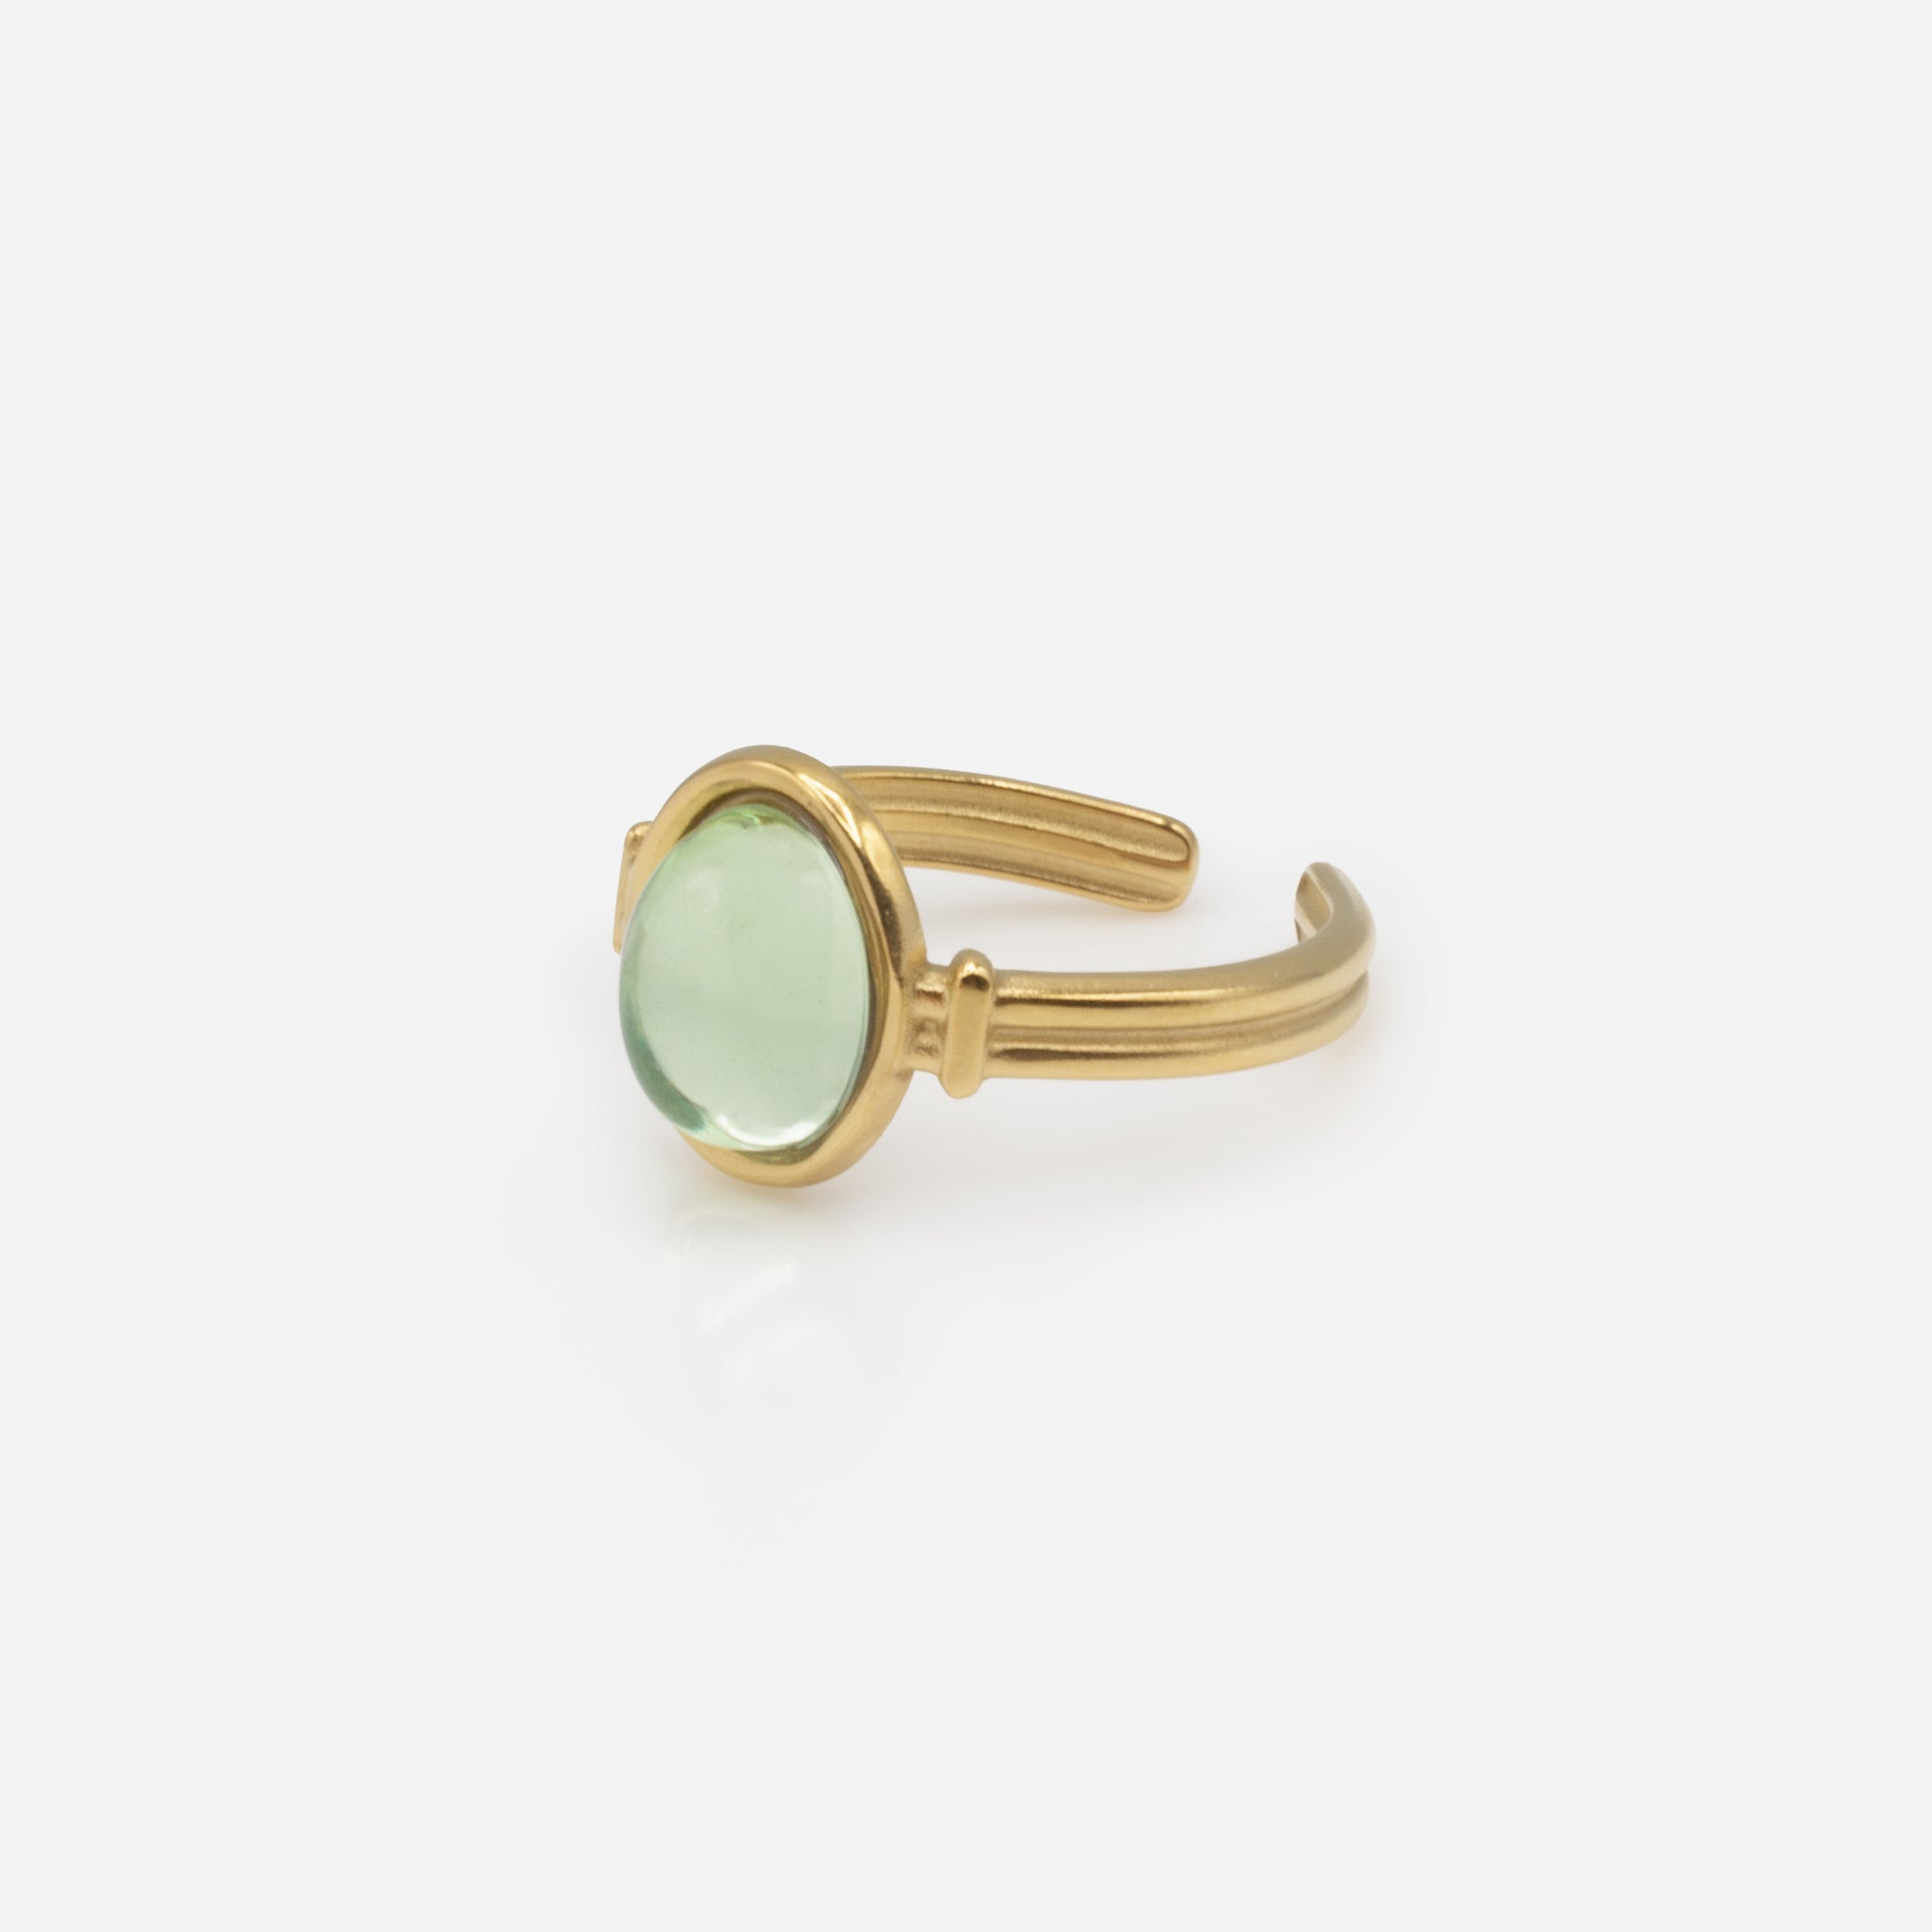 Golden ring with translucent oval green stone